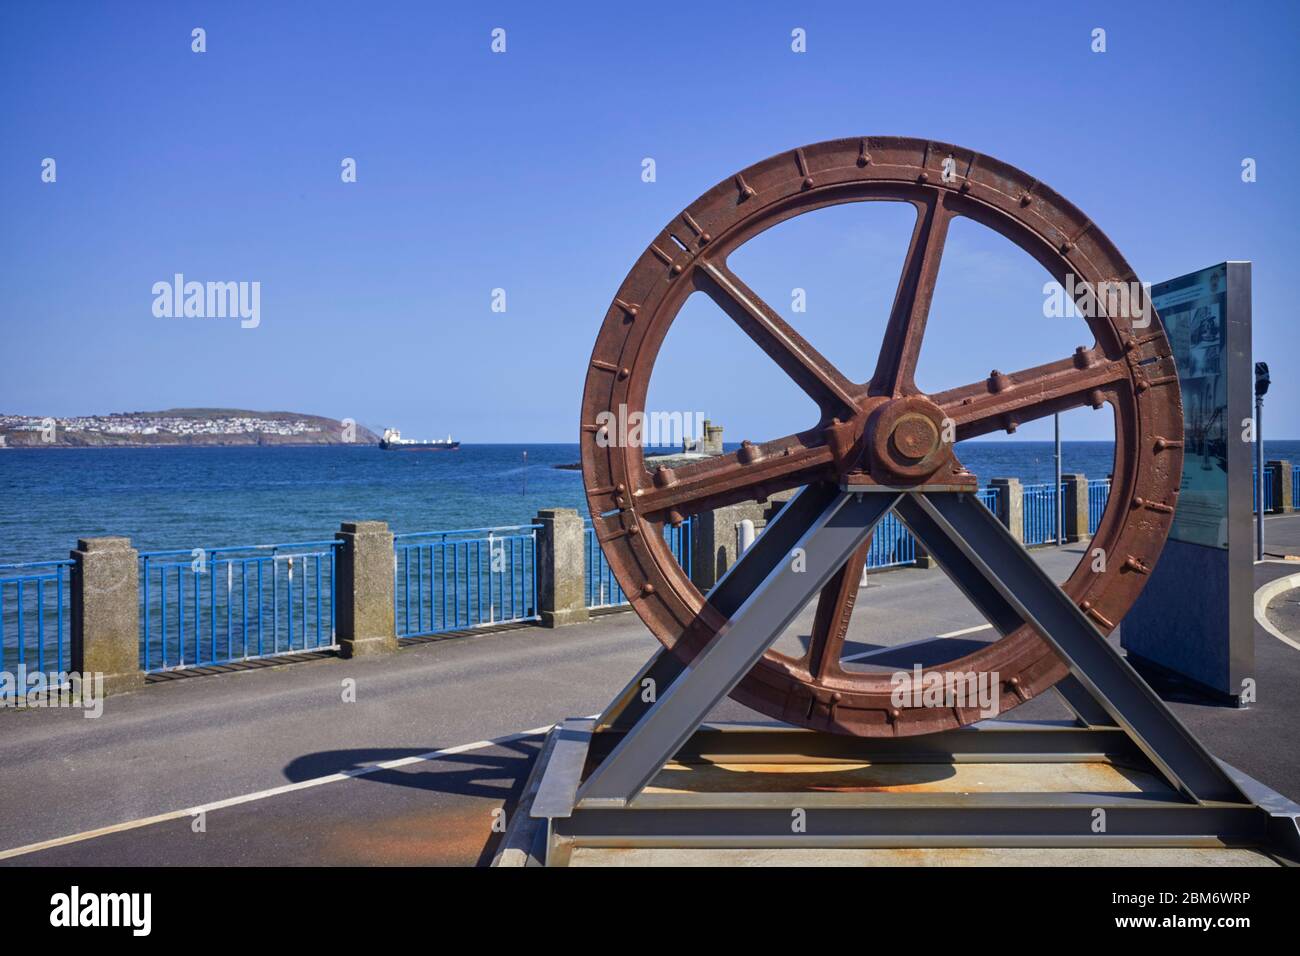 Tower of Refuge seen through the spoke of large cast iron wheel used in Douglas cable car trams Stock Photo